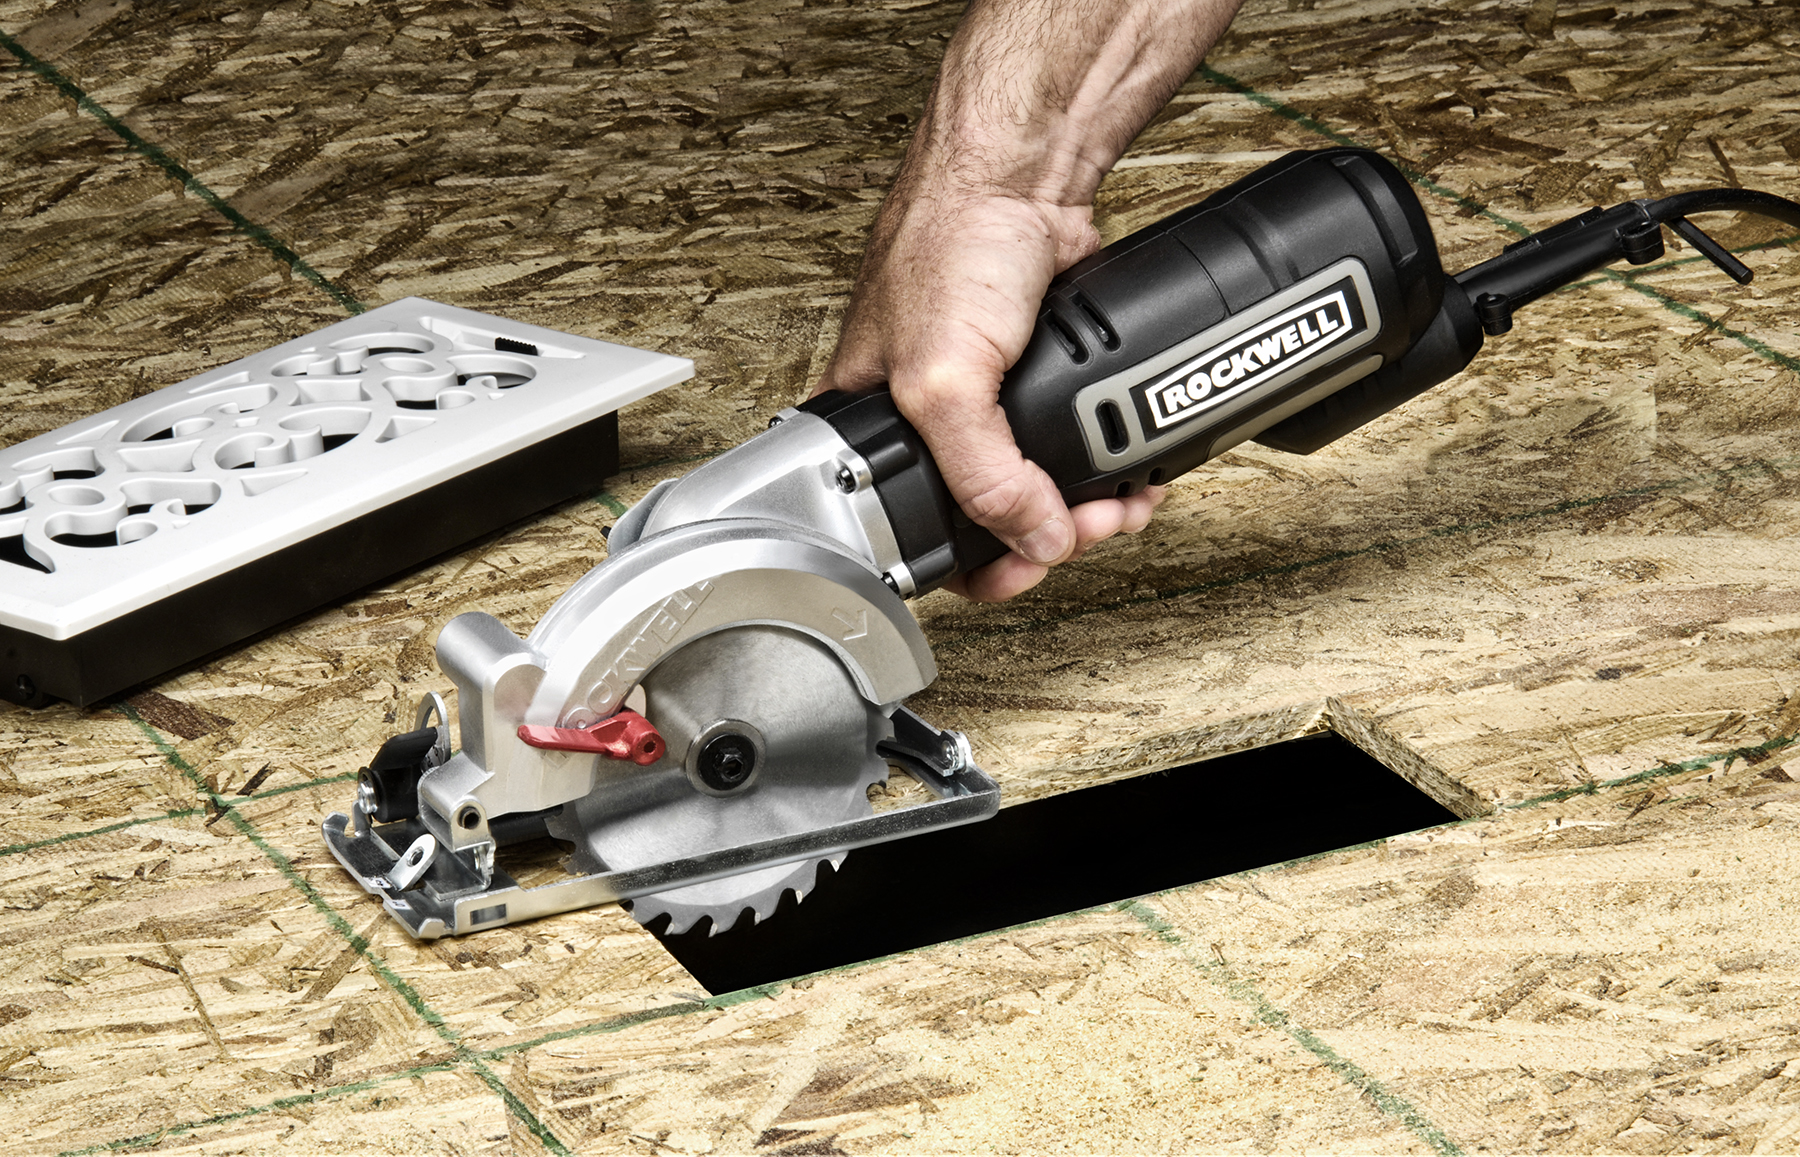 Rockwell Compact Circular Saw's slim, inline grip design provides great comfort, balance and control.